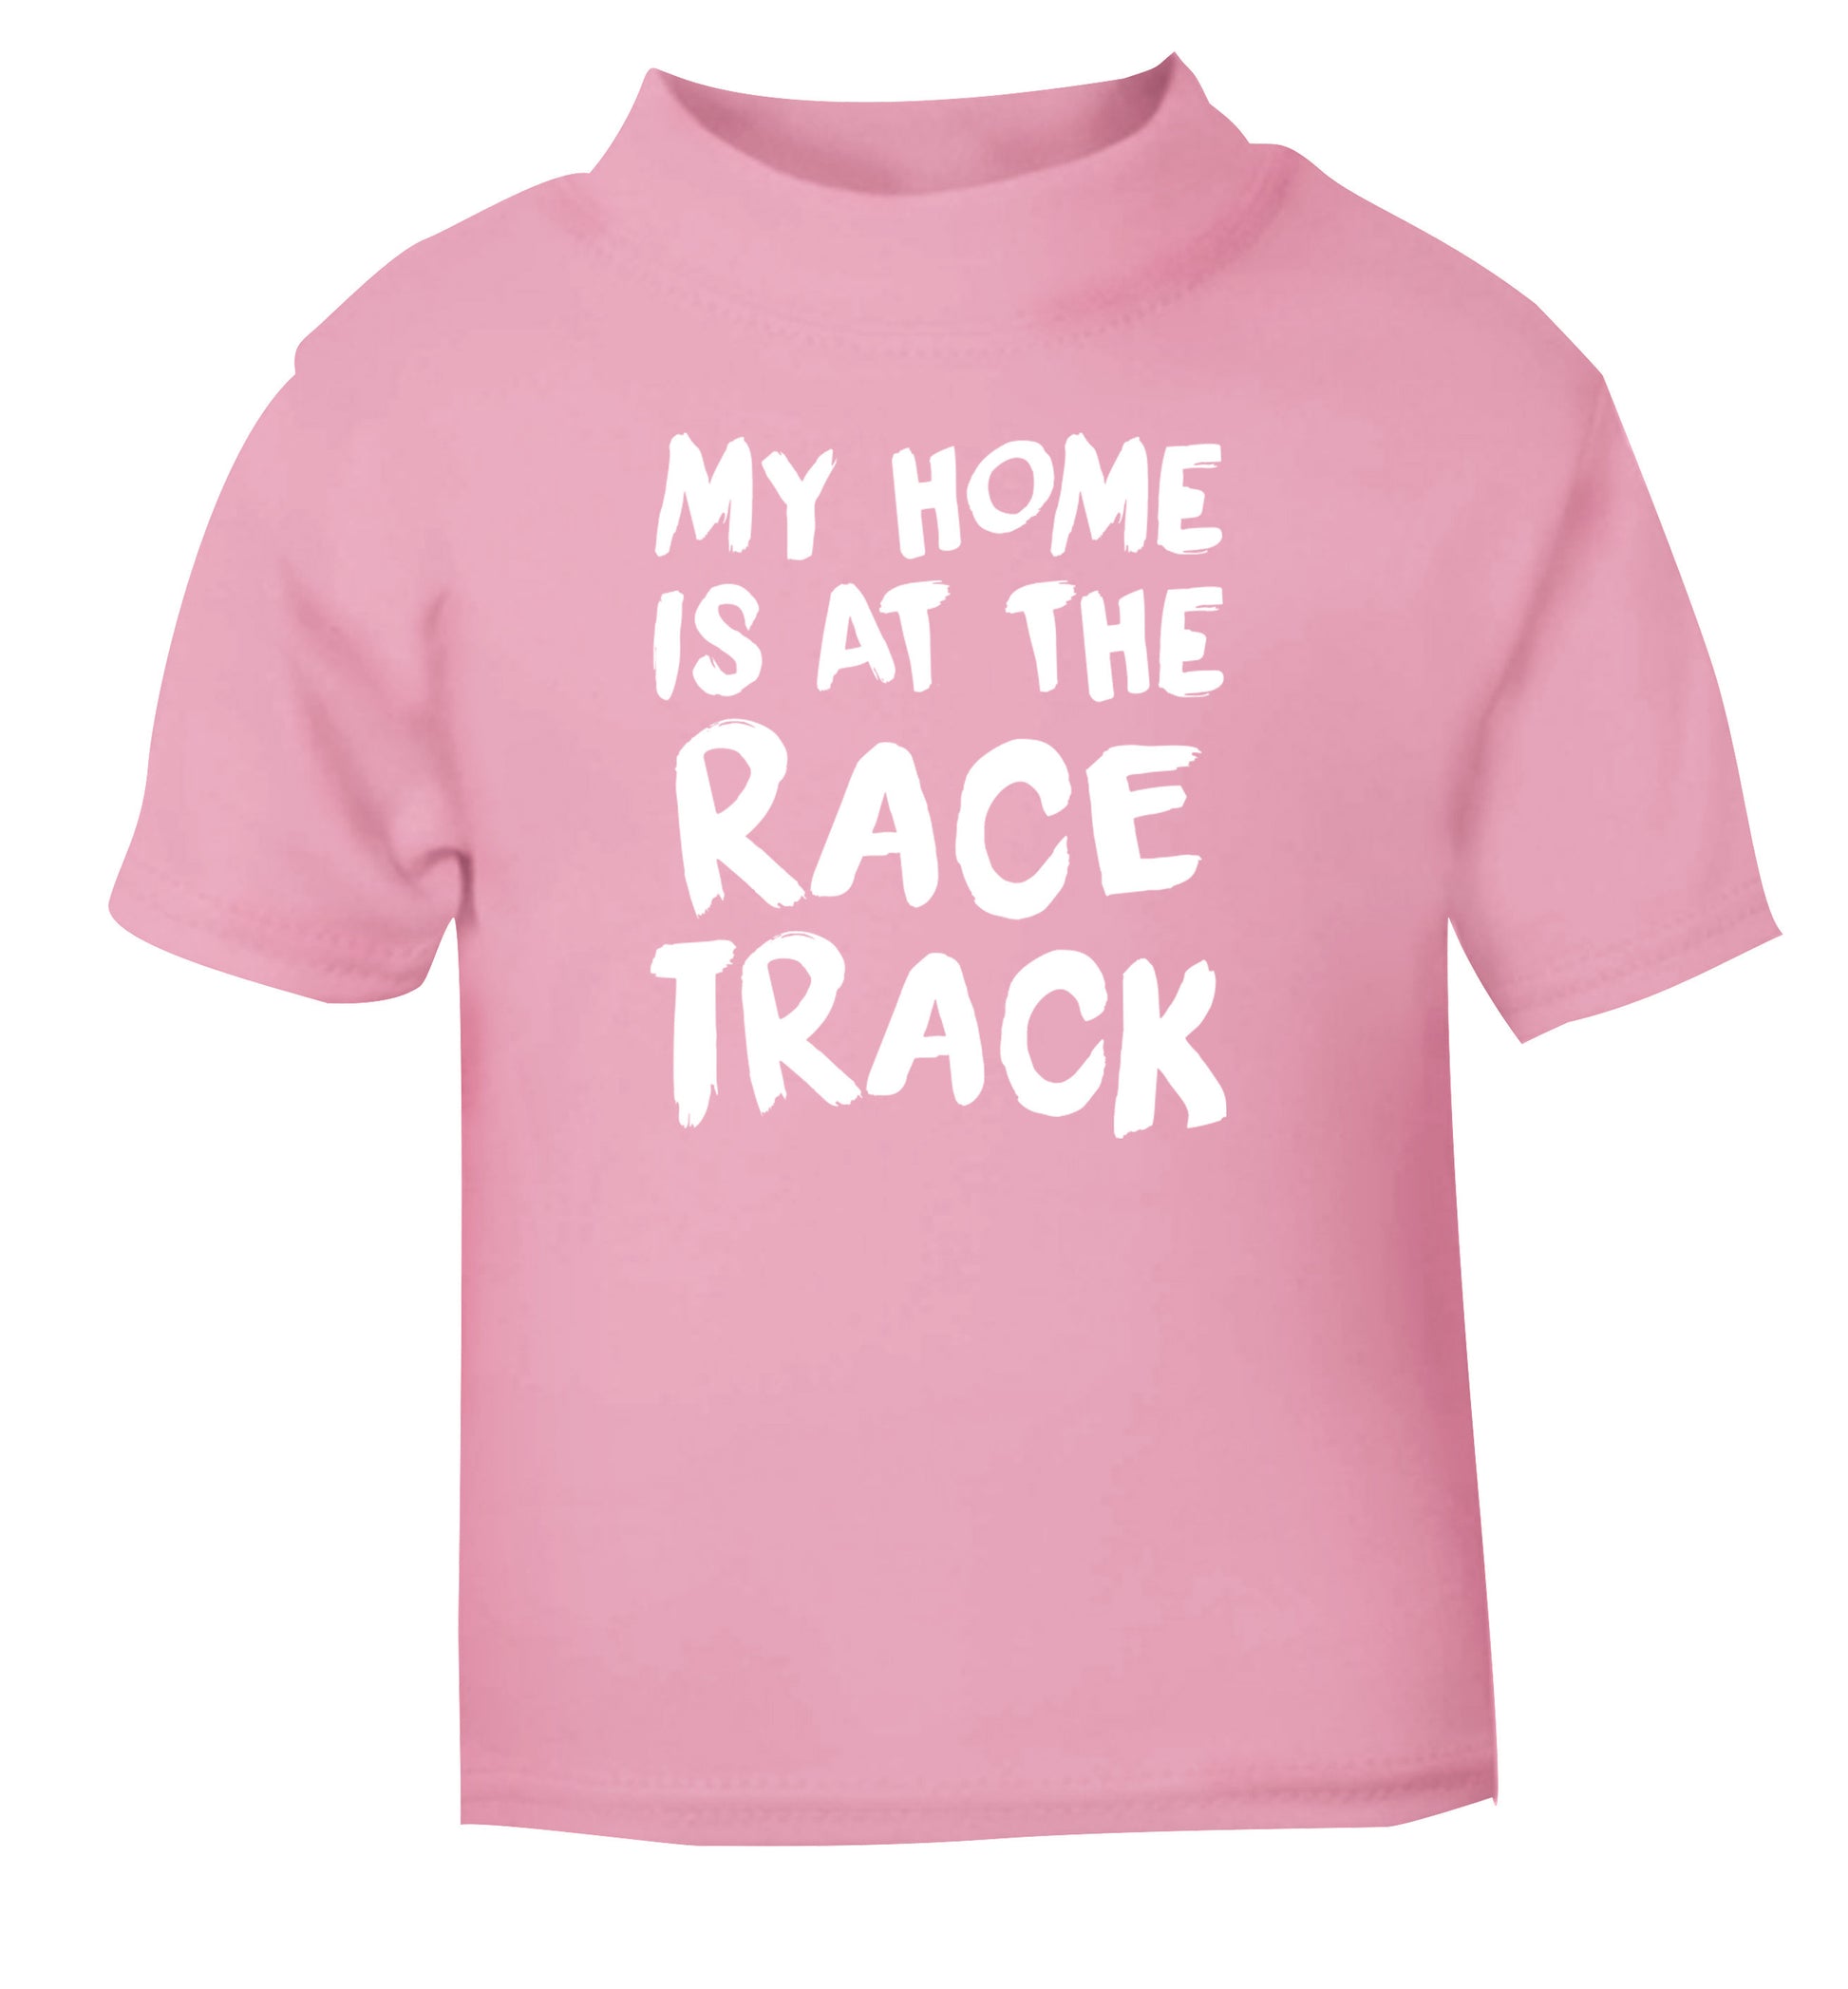 My home is at the race track light pink Baby Toddler Tshirt 2 Years